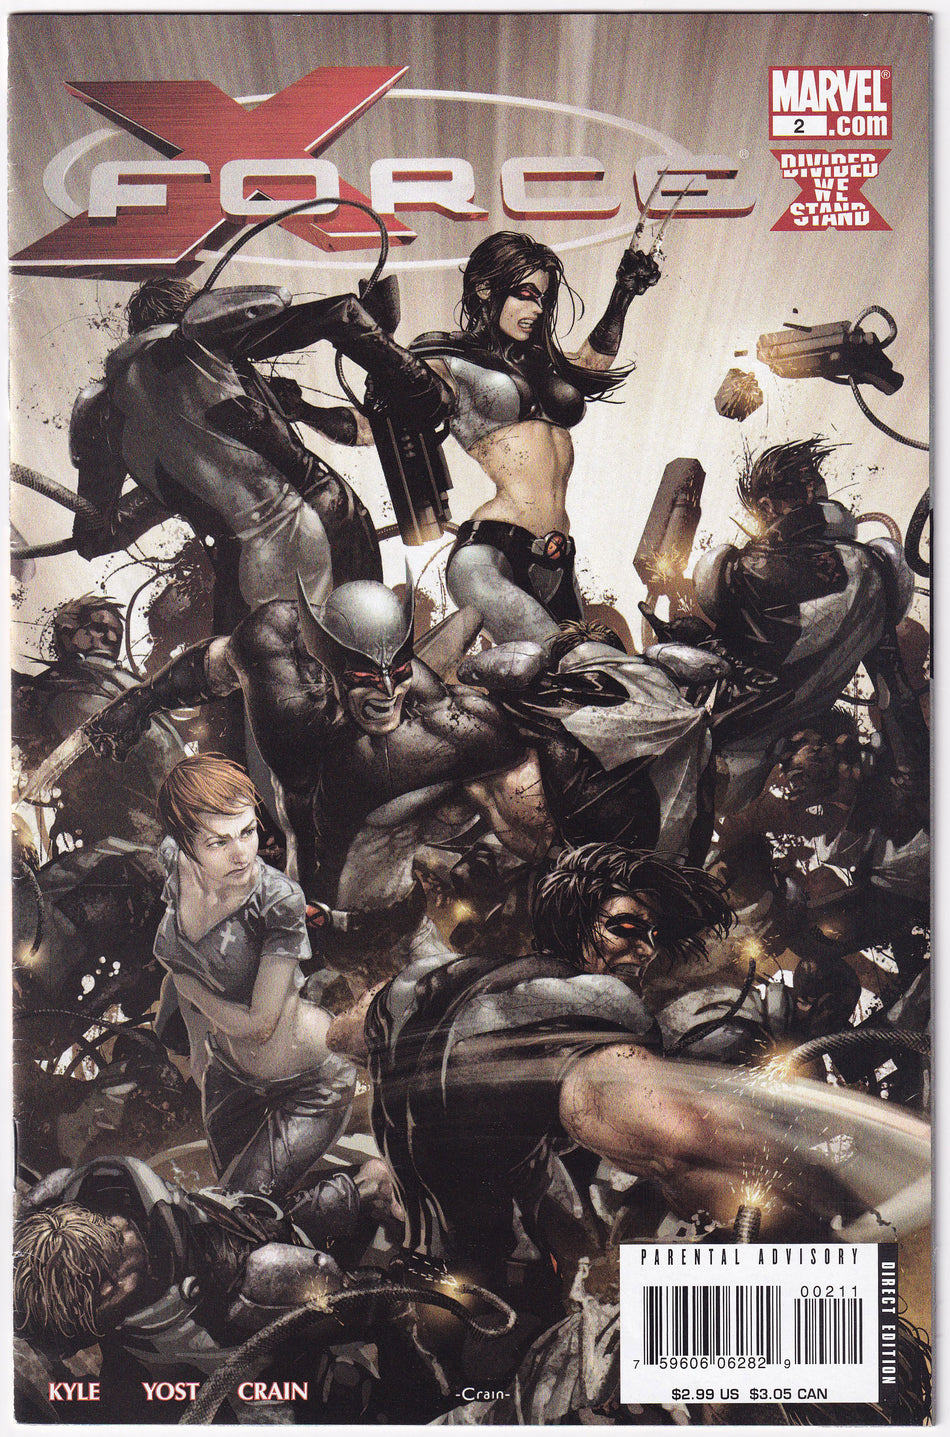 Photo of X-Force, Vol. 3 (2008)  Iss 2A Very Fine  Comic sold by Stronghold Collectibles